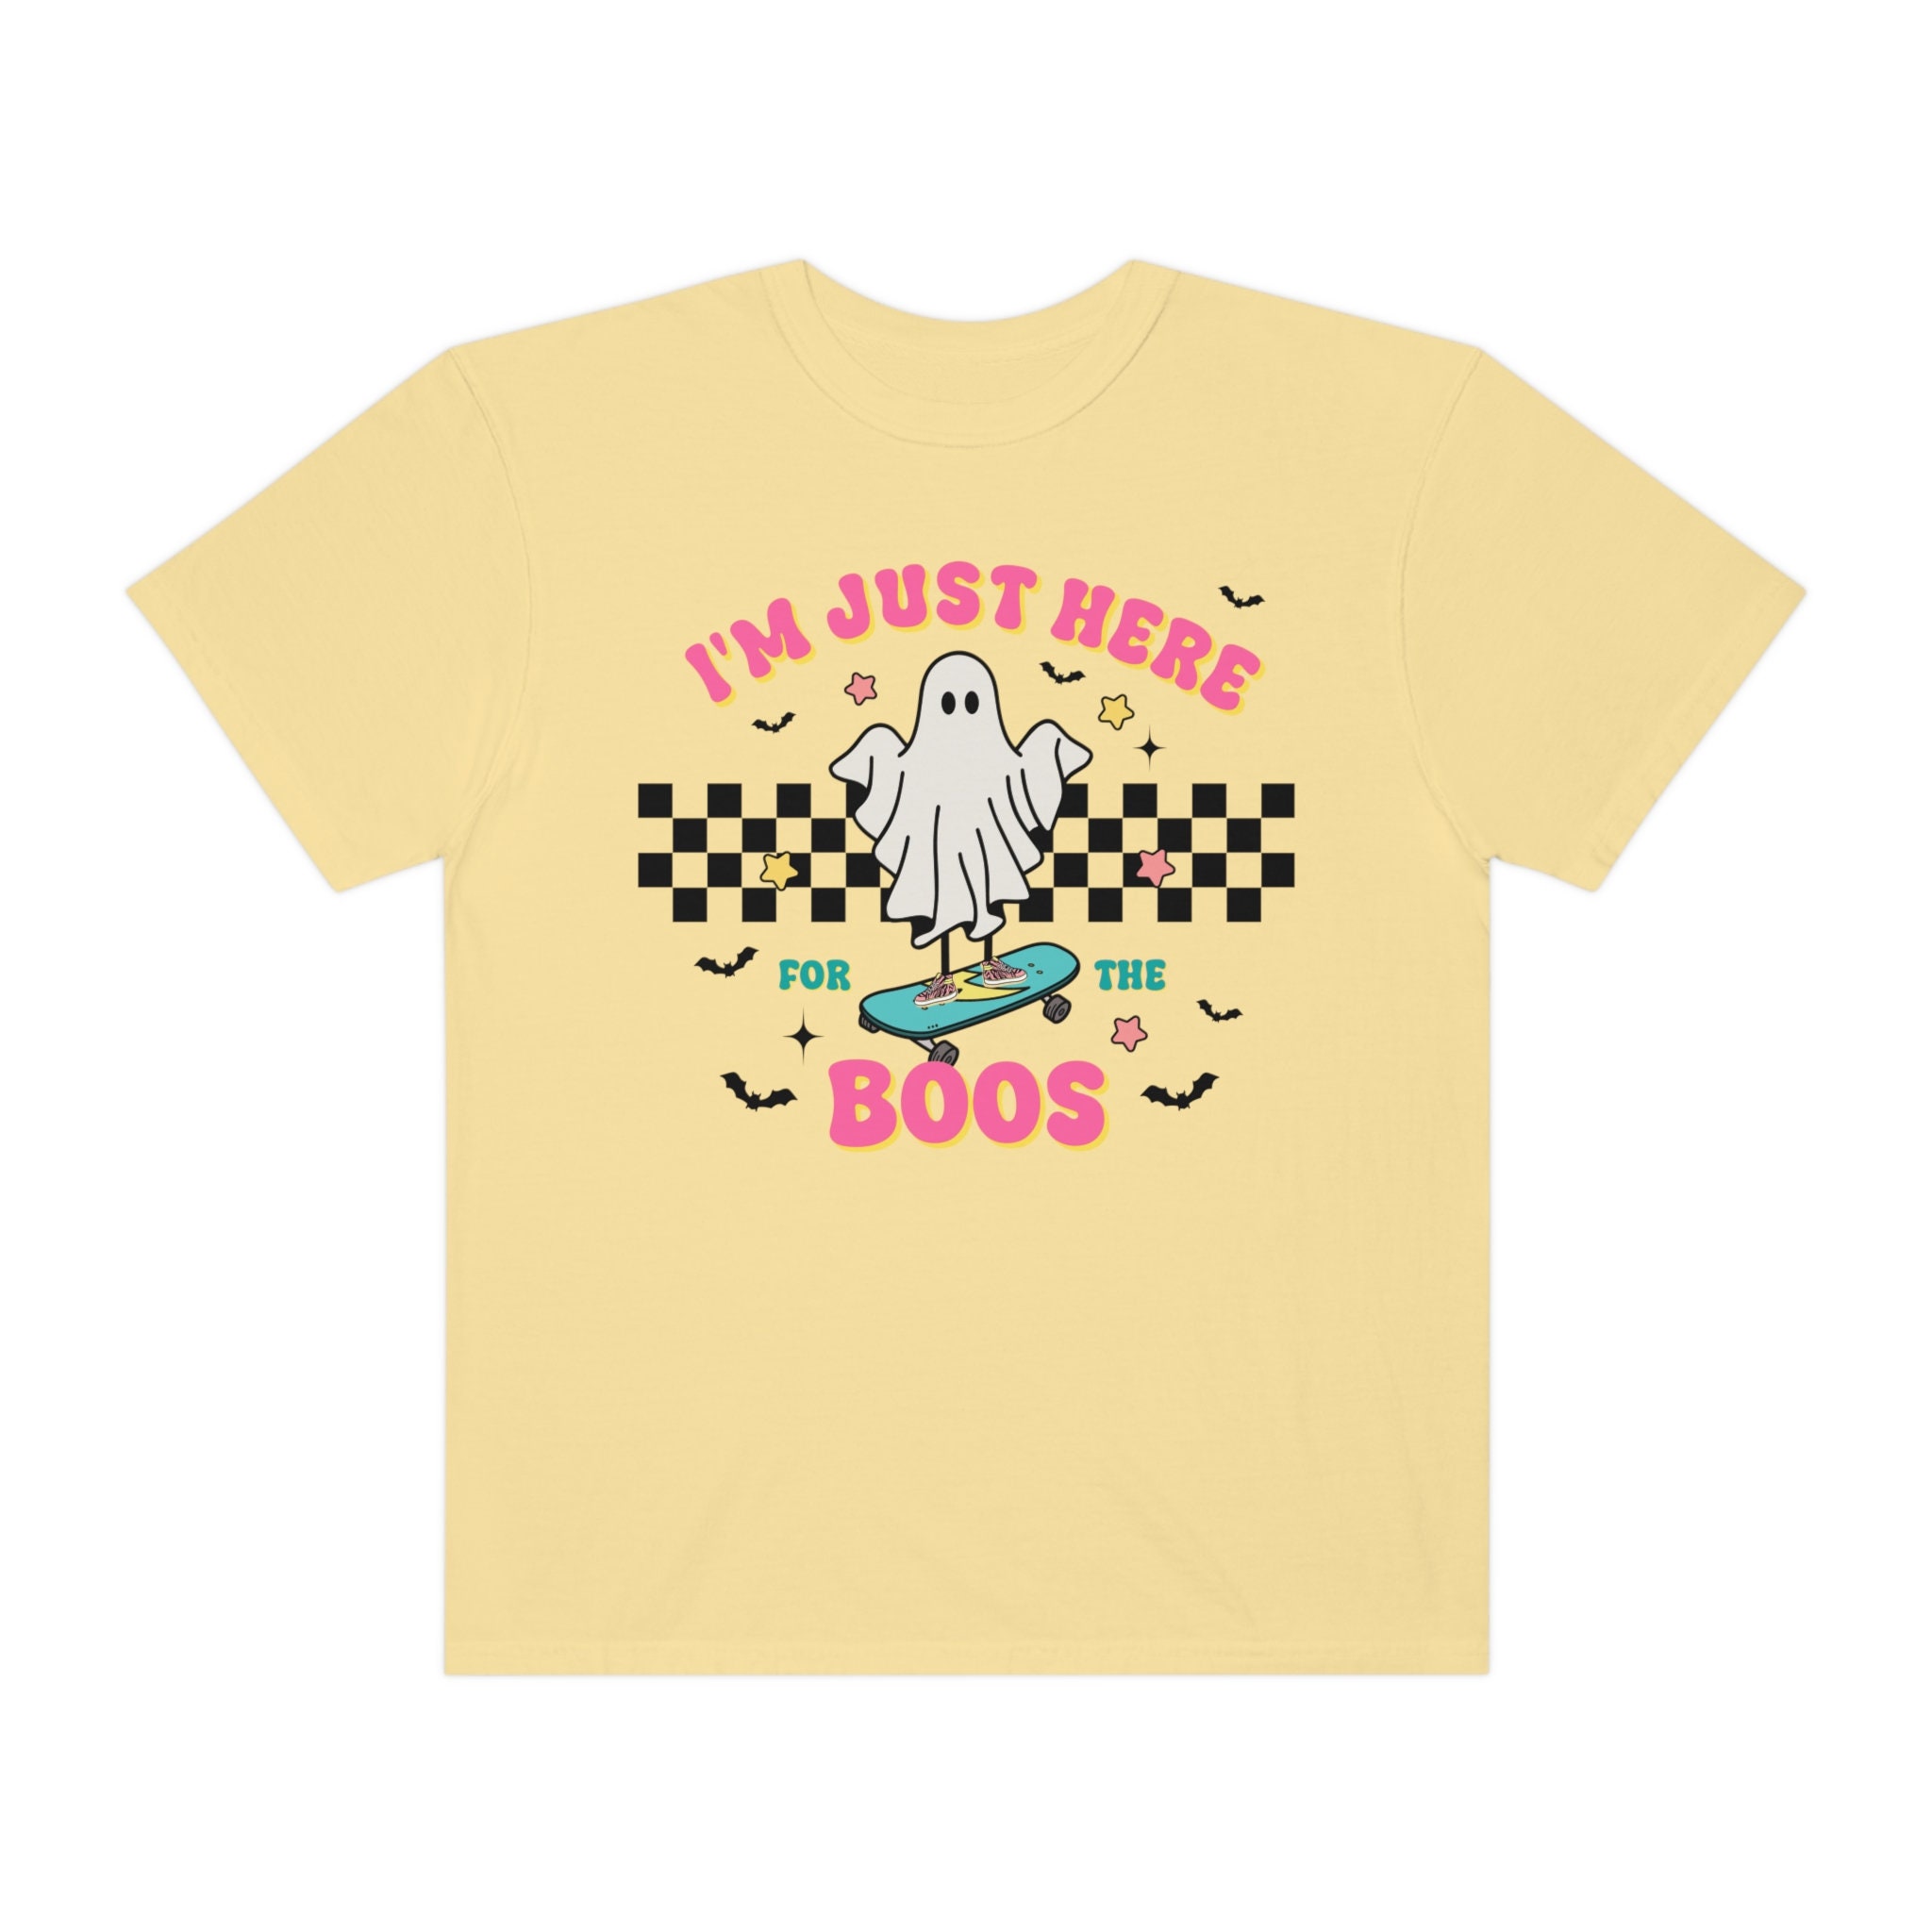 Discover  Checkered Halloween Ghost Shirt Here for the Boos Oversized  Shirt Preppy Halloween Shirt Trendy Oversized